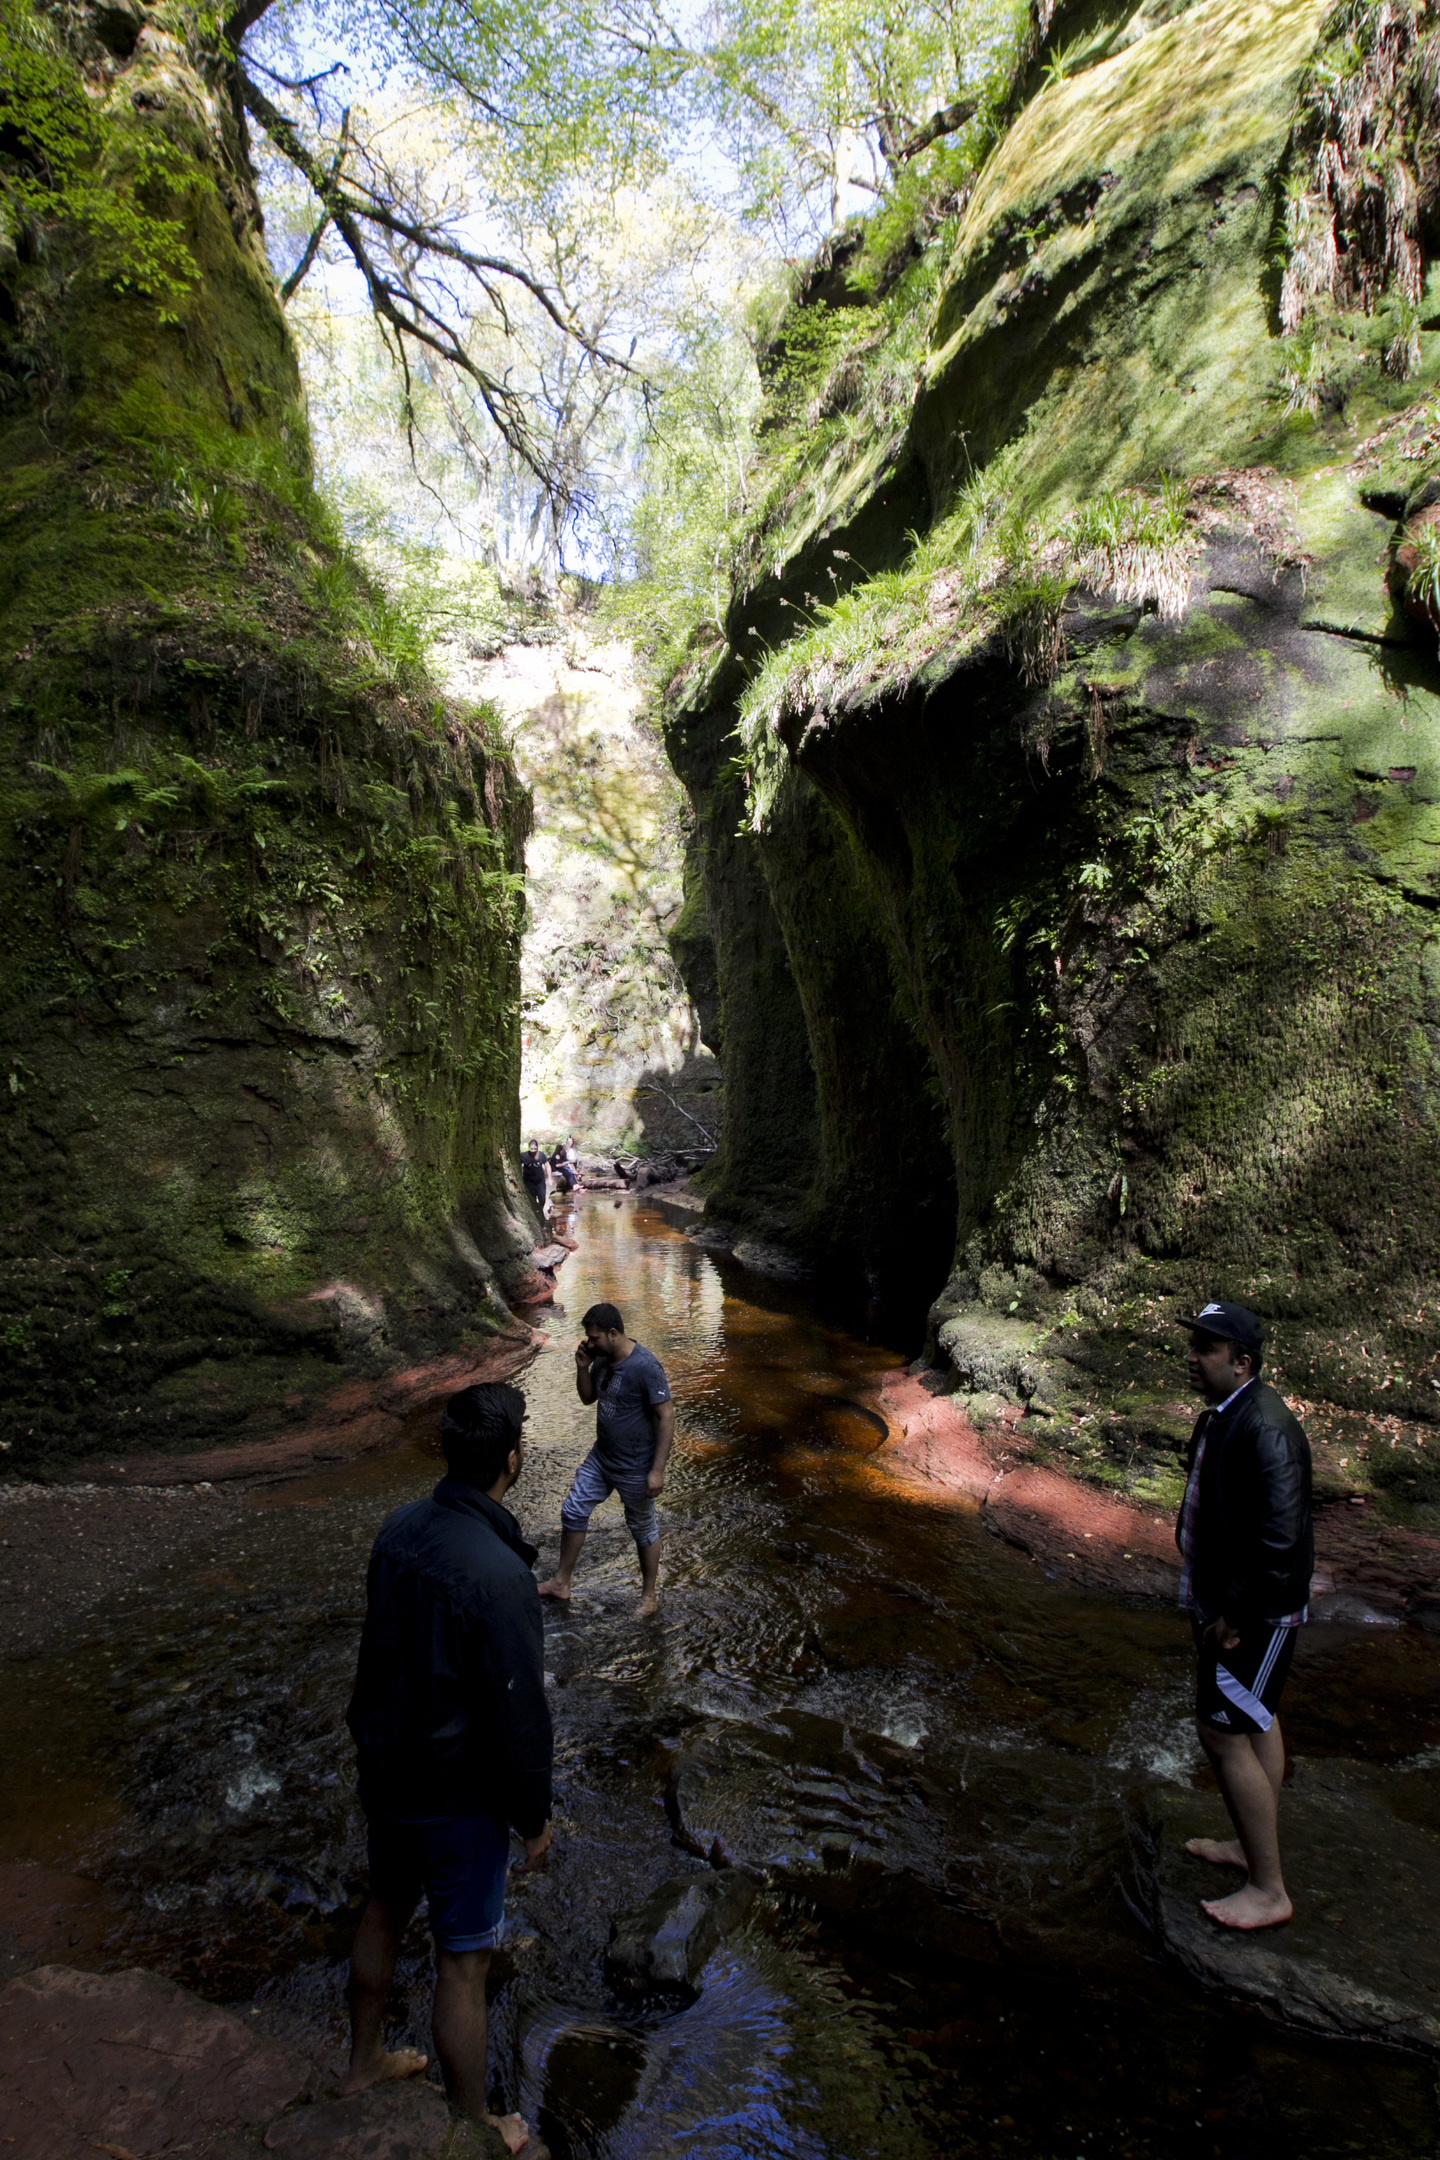 9/5/17 . The Sunday Post, by Andrew Cawley. Pics of The Devil's Pulpit, river area in Finnich Glen, near Loch Lomond, which is proving very popular with visitors, due to it appearing in scenes from TV show, Outlander. However locals are unhappy because a large amount of litter and rubbish is being left behind by visitors. Location: Devils Pulpit, The Trossachs.